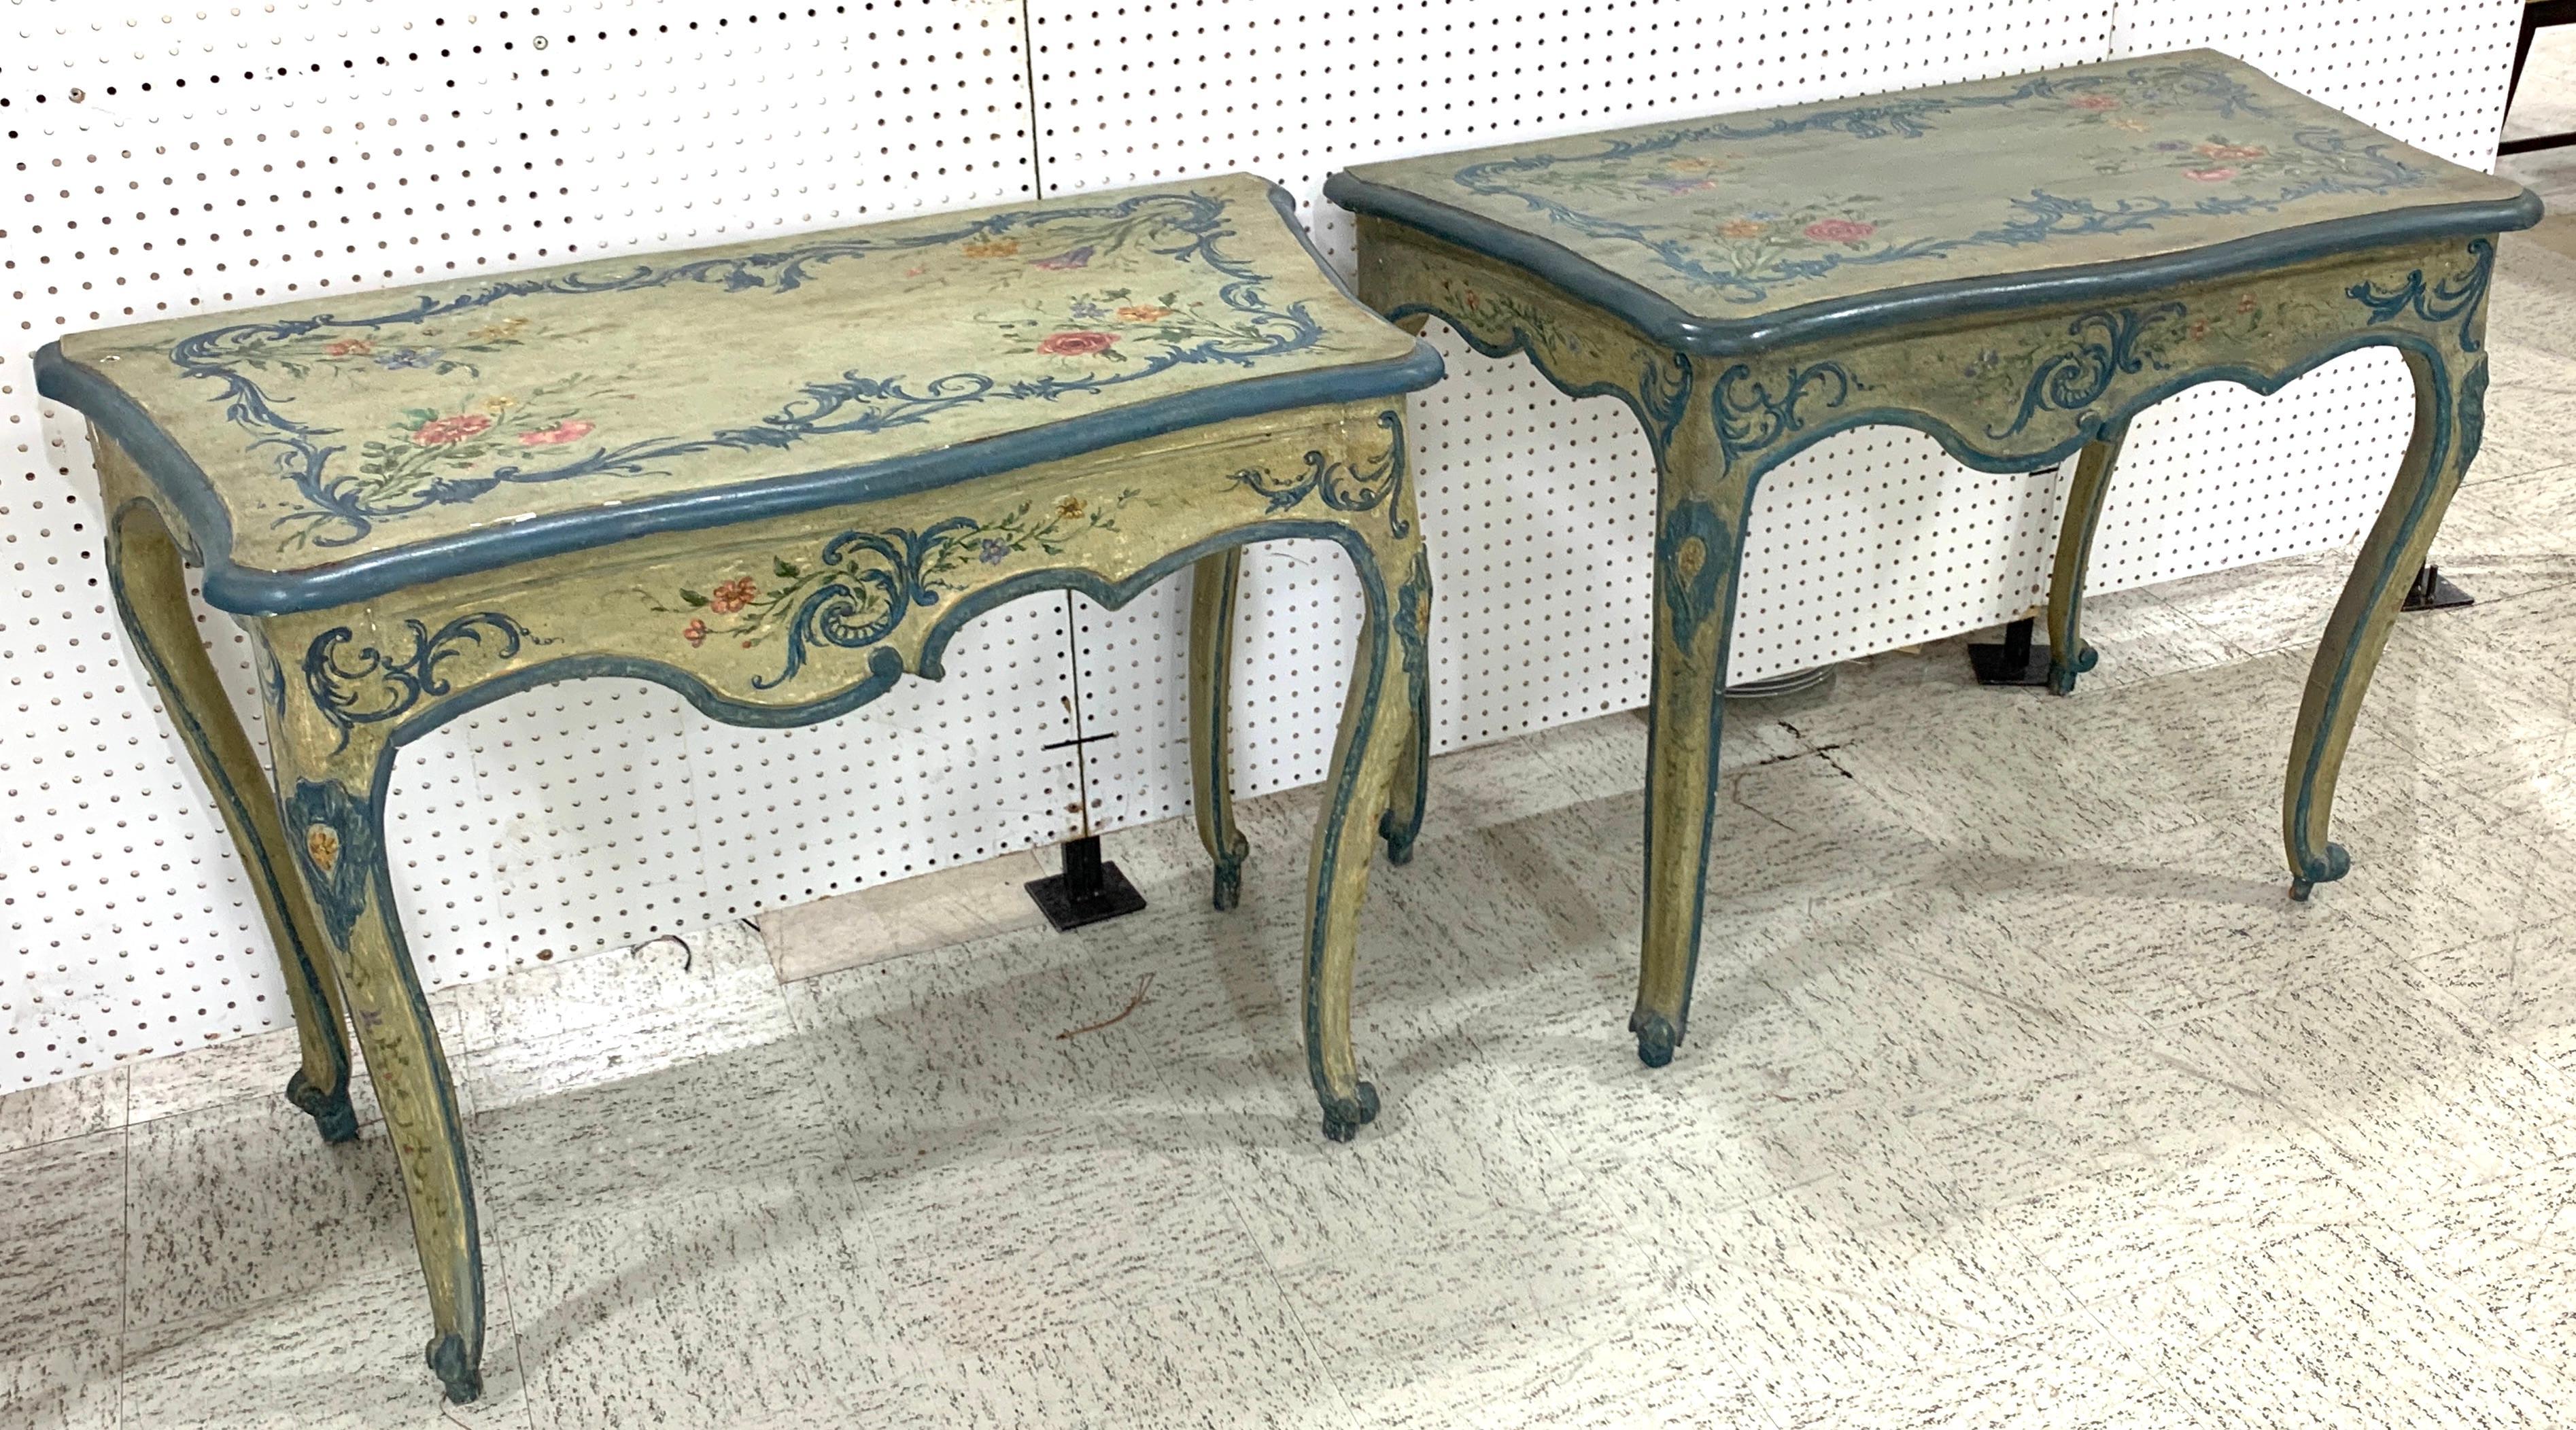 Polychromed Near Pair of 18th-19th Century Painted Italian Console Tables, François Coty